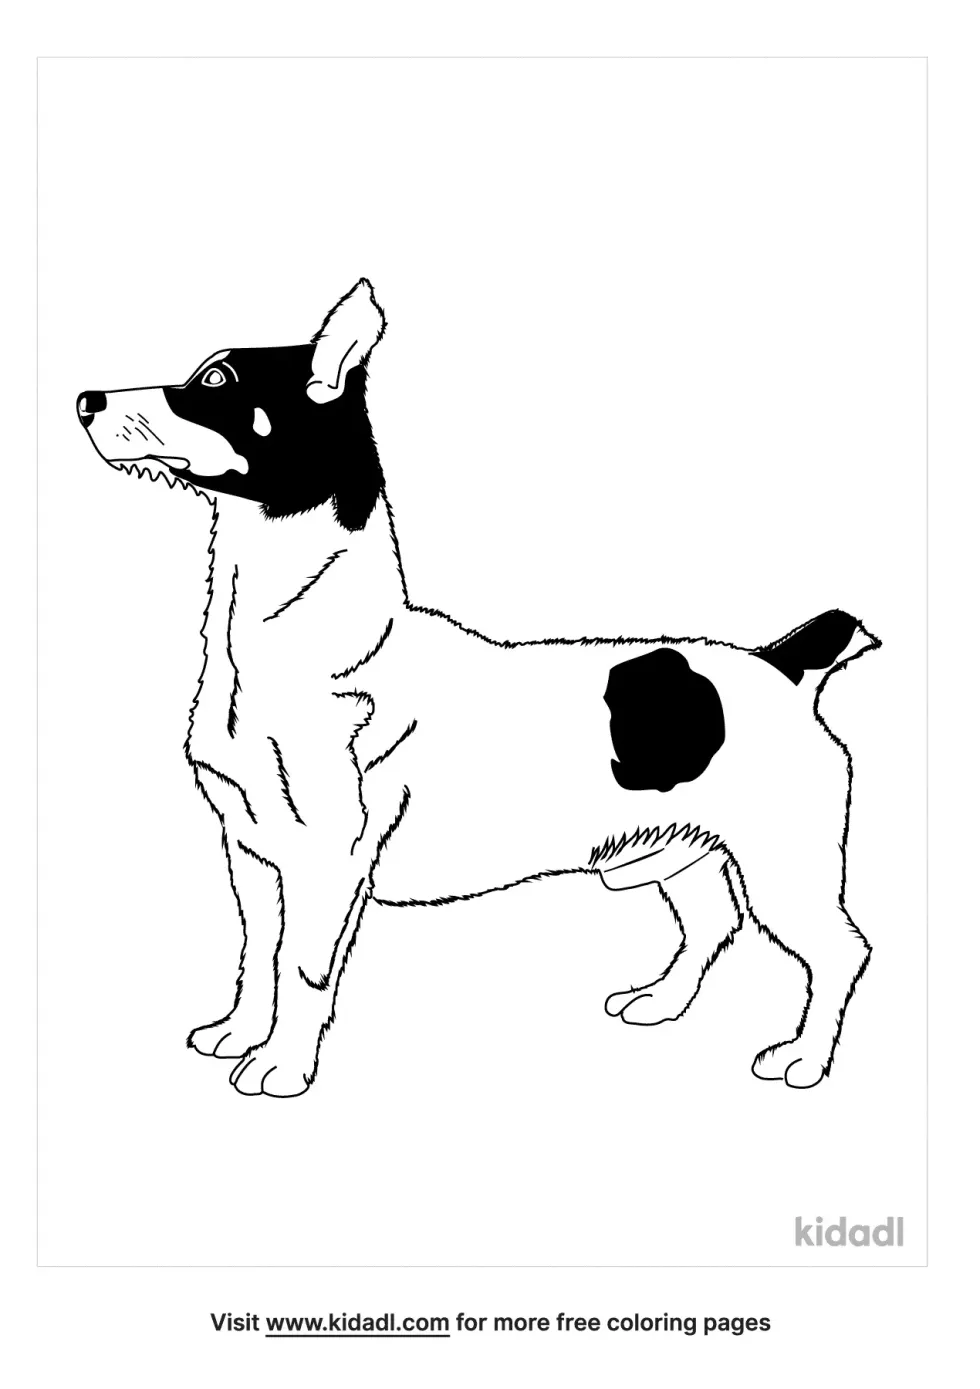 Teddy Roosevelt Terrier Coloring Page